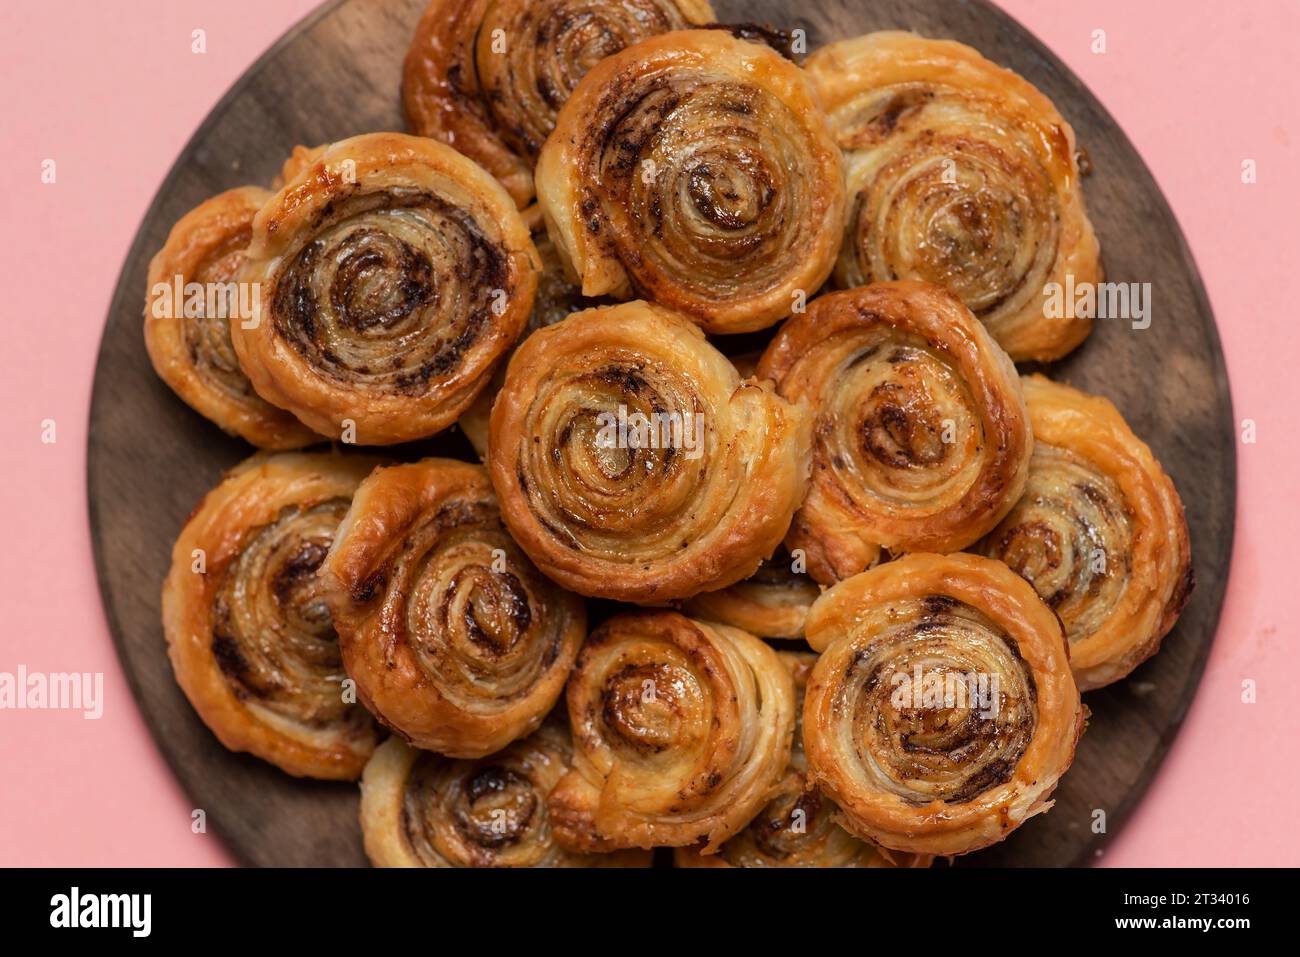 Freshly baked sweet and crispy cinnamon rolls. On a wooden plate and pink background Stock Photo